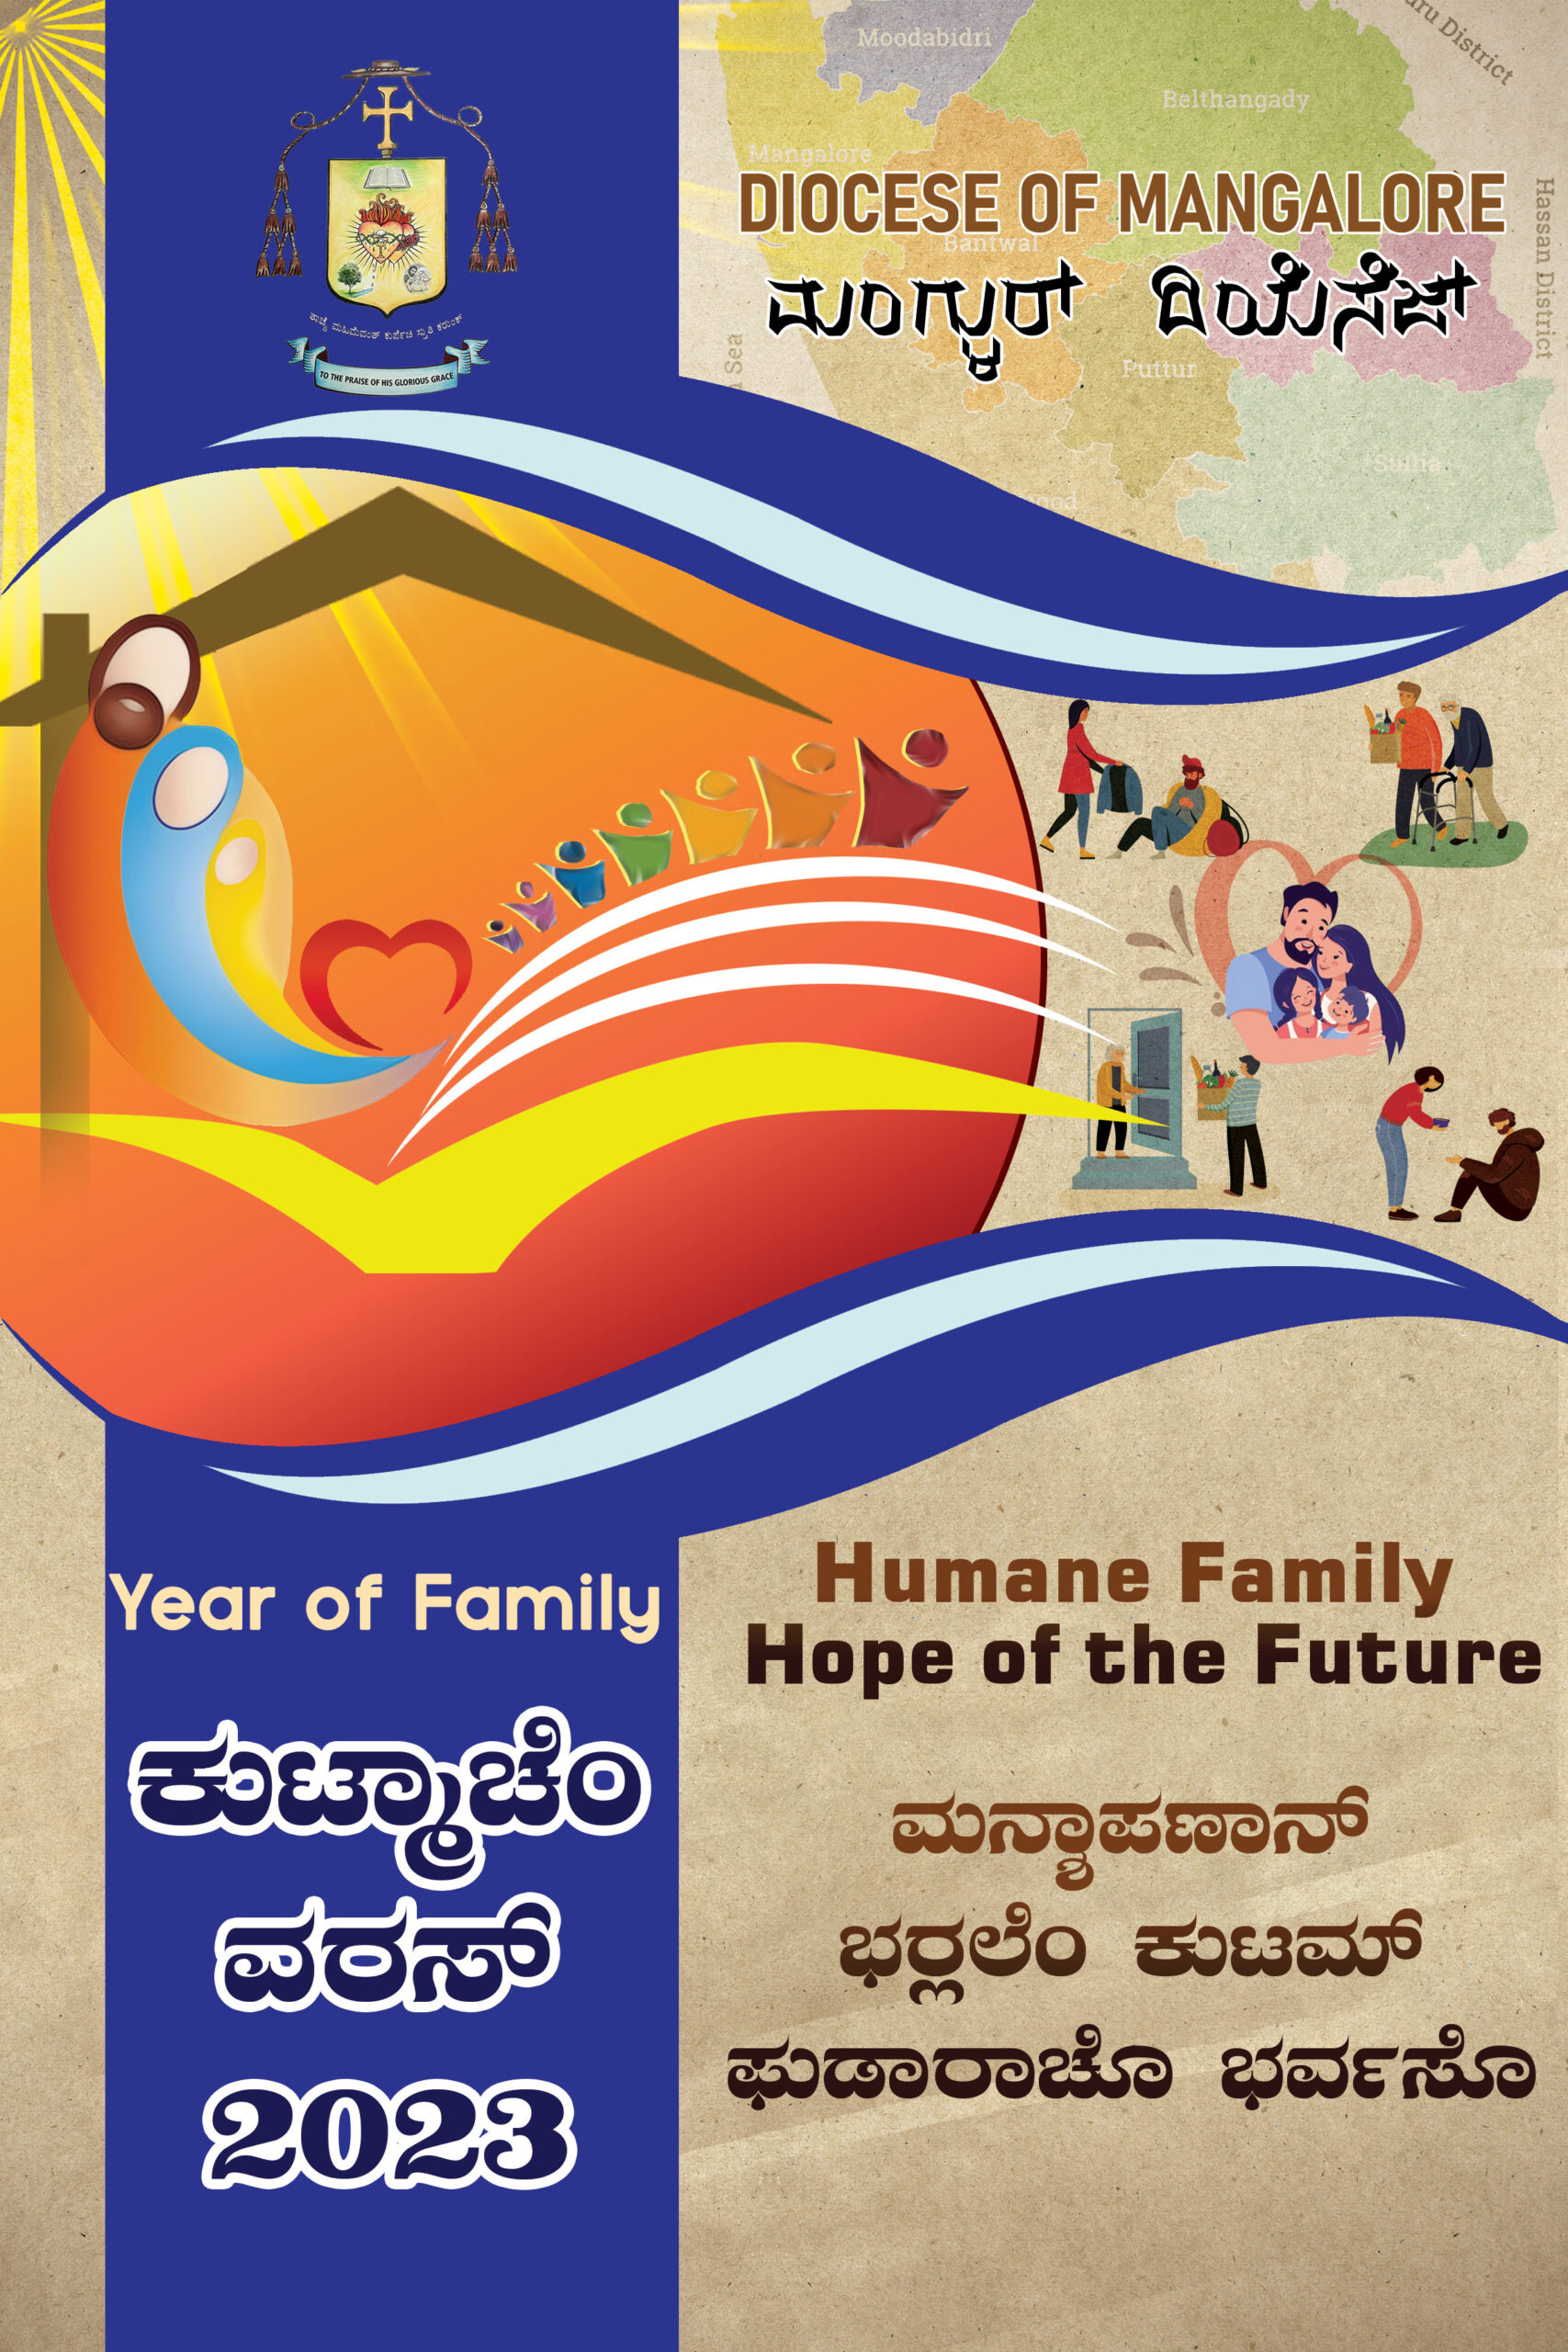 Year of Family Logo Mangalore Diocese